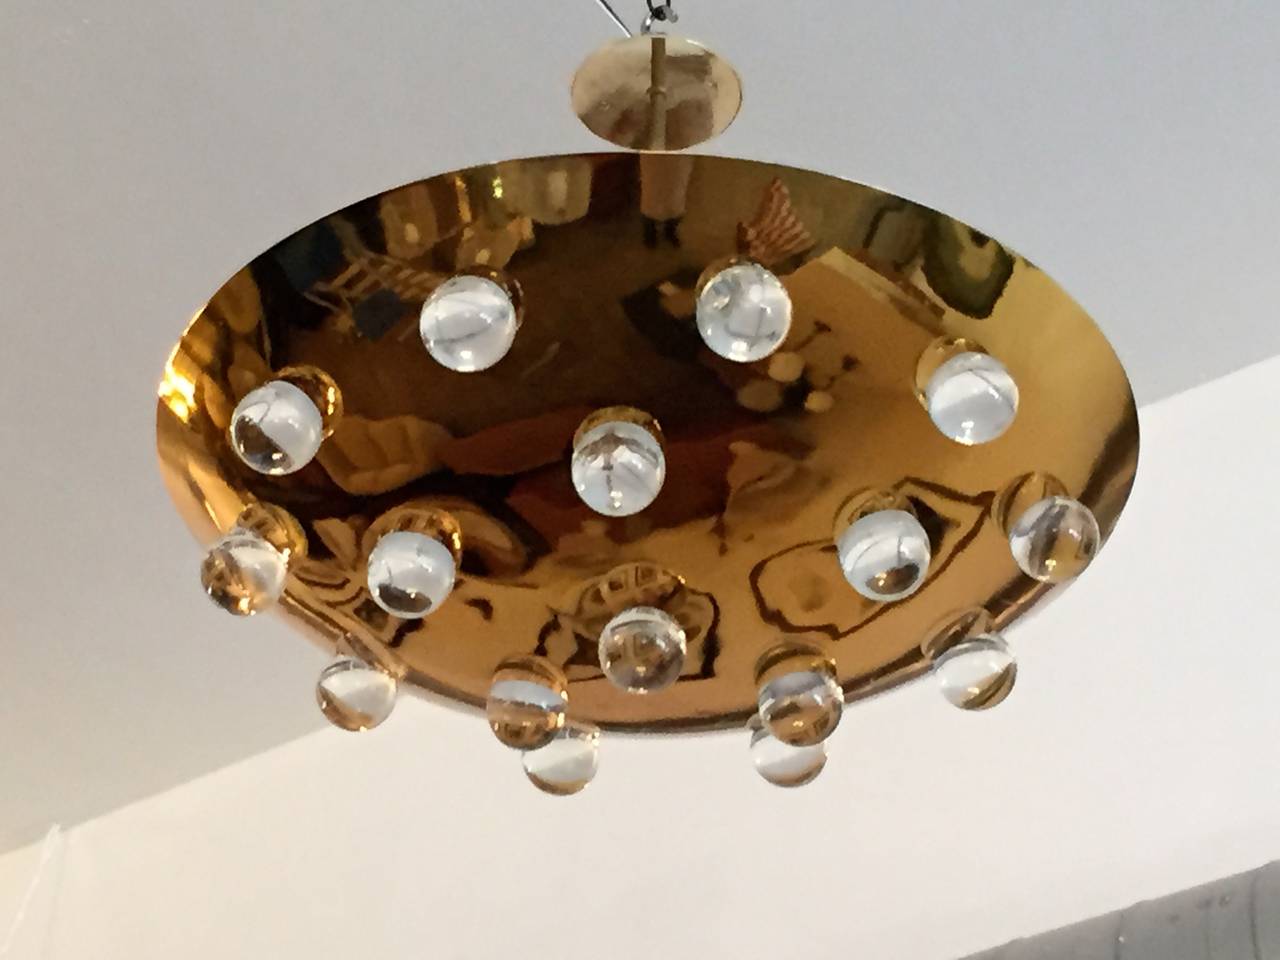 A stunning 1960s French gold-plated brass round disc fixture with 16 solid glass orbs. Five-light sources which emit light downward through the glass as well as up toward the ceiling. The ceiling pole can be lengthened or shortened. Rewired and